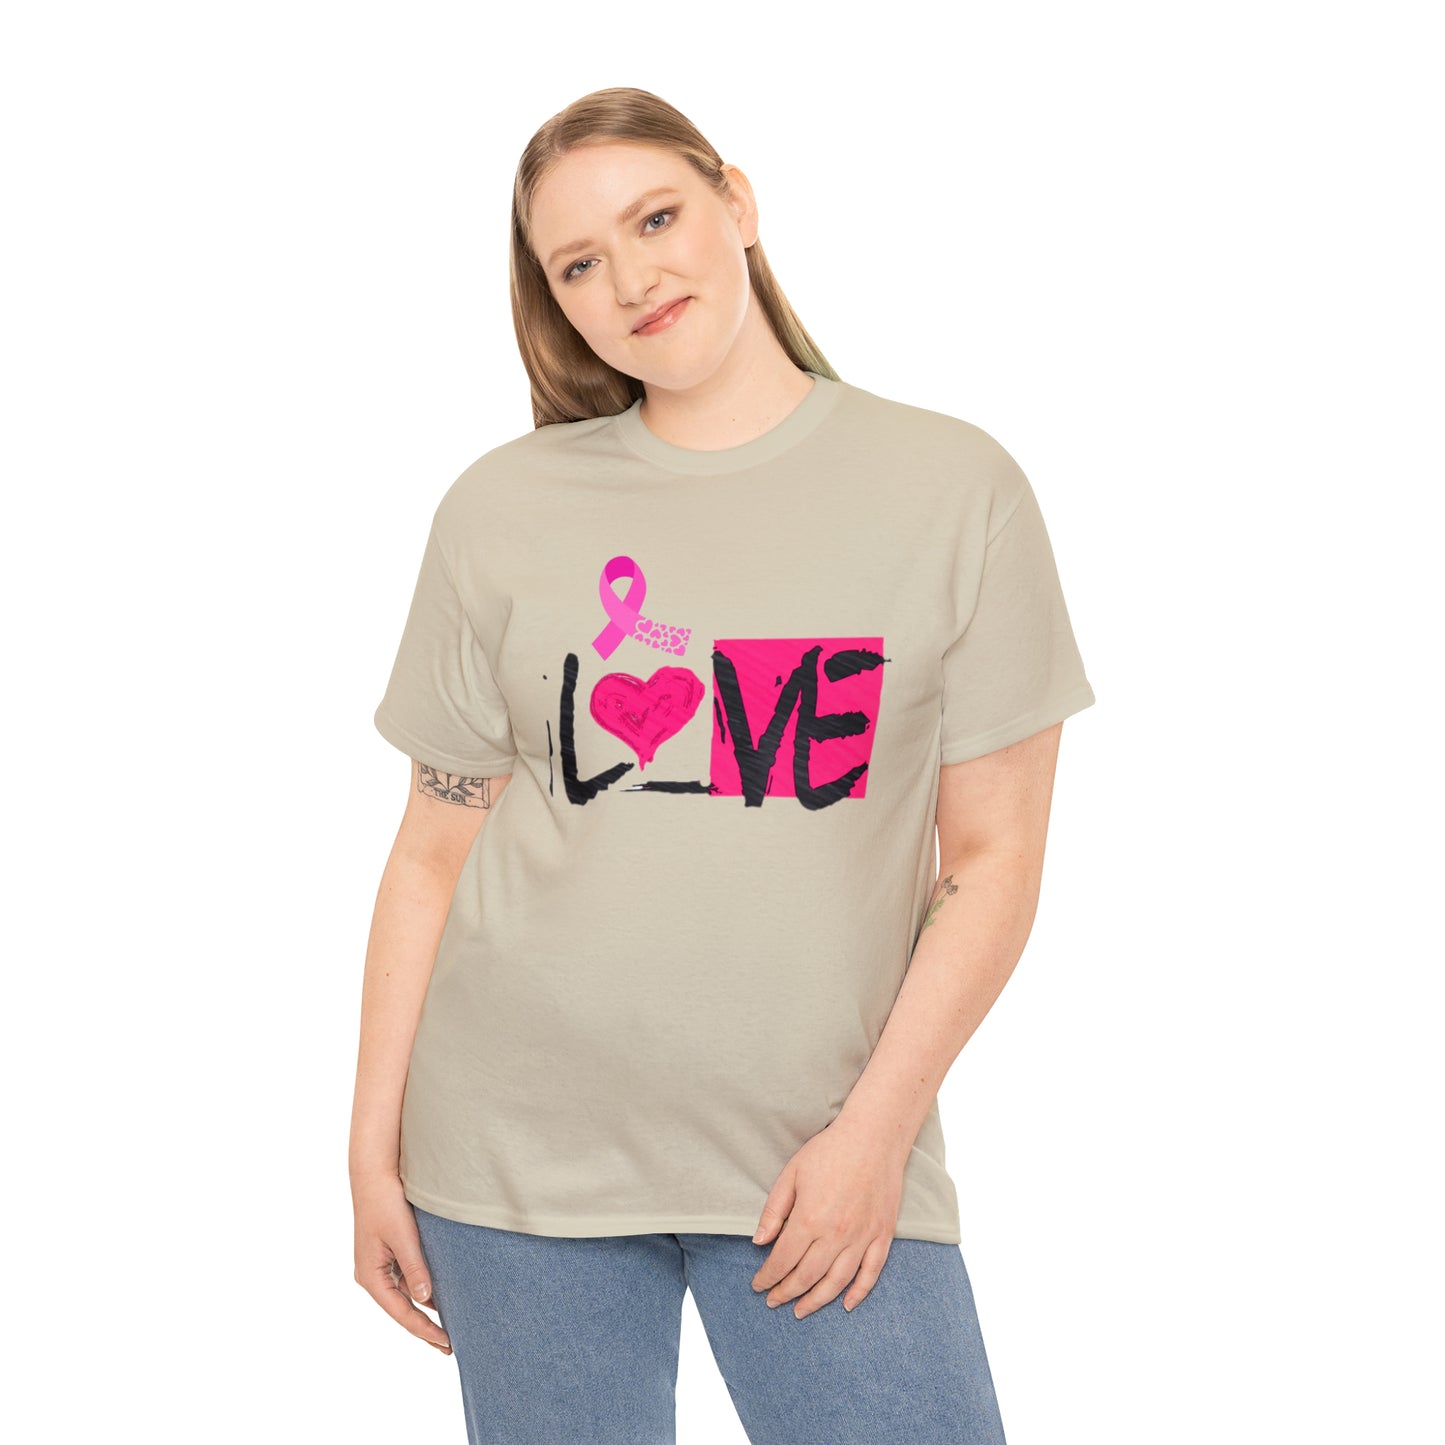 Fight Version 🥊🎀Breast Cancer Awareness L♥️VE Tee/ Sean Breed Edition🎀